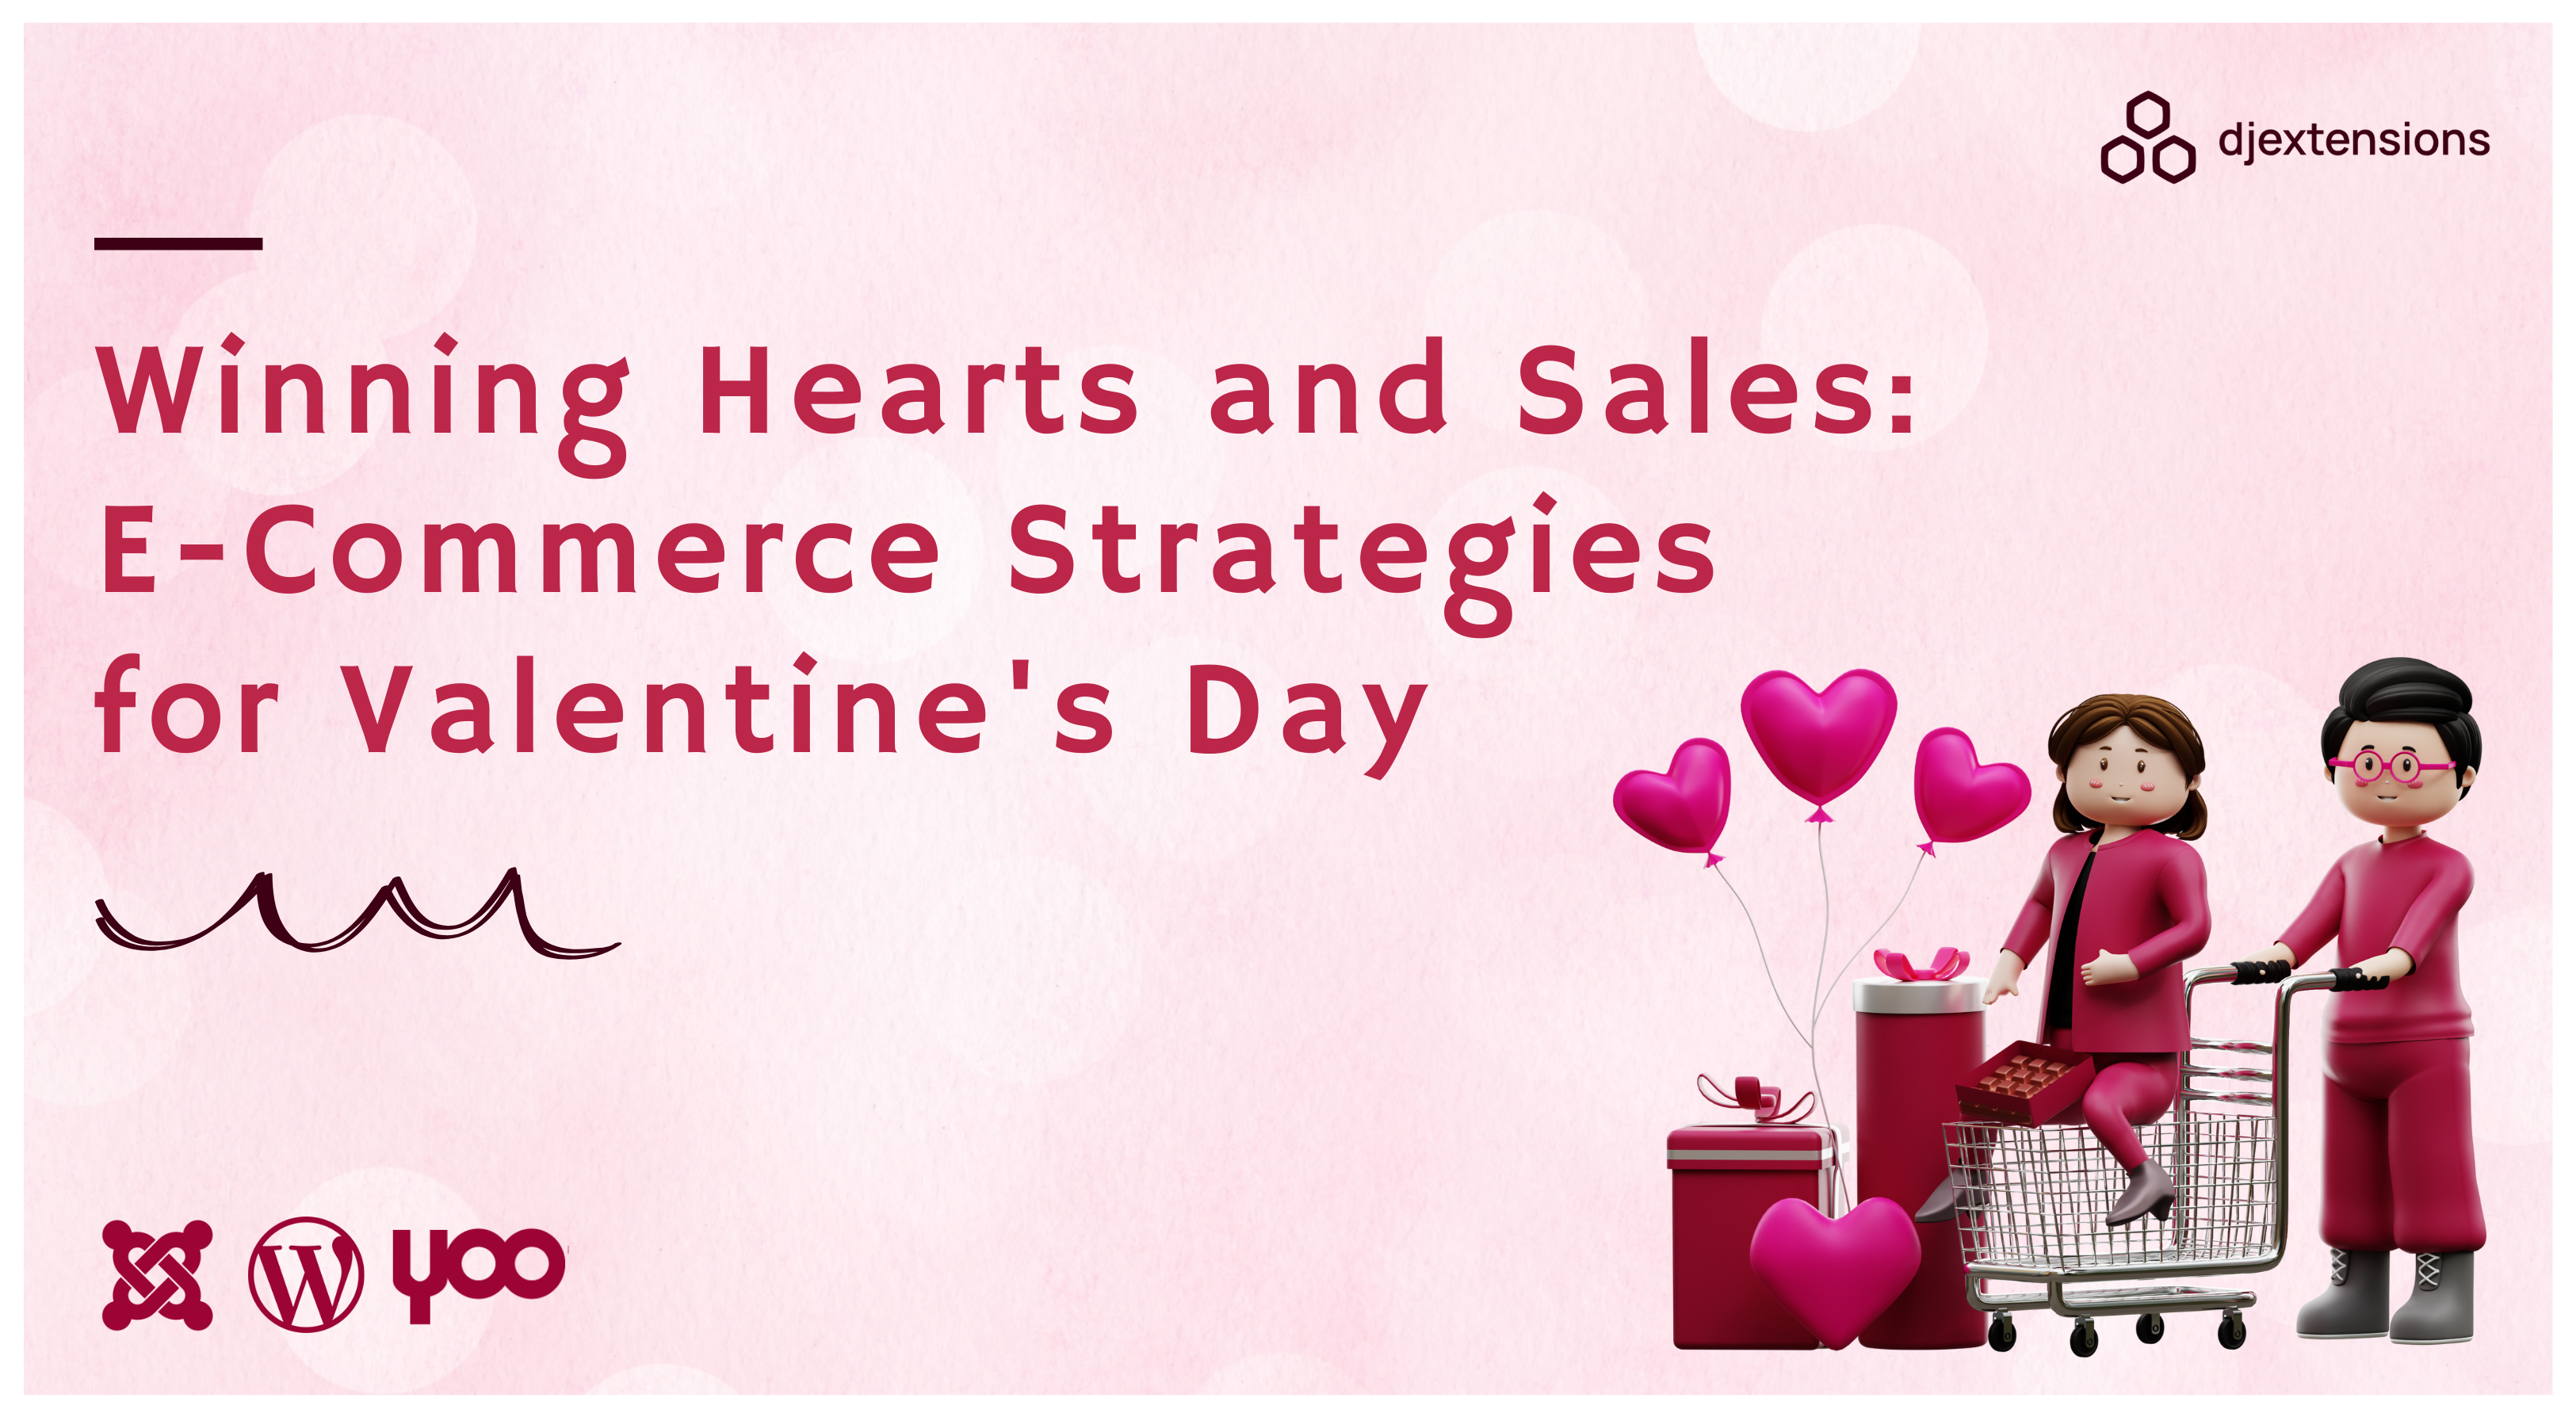 5 main eCommerce strategies for Valentine's Day